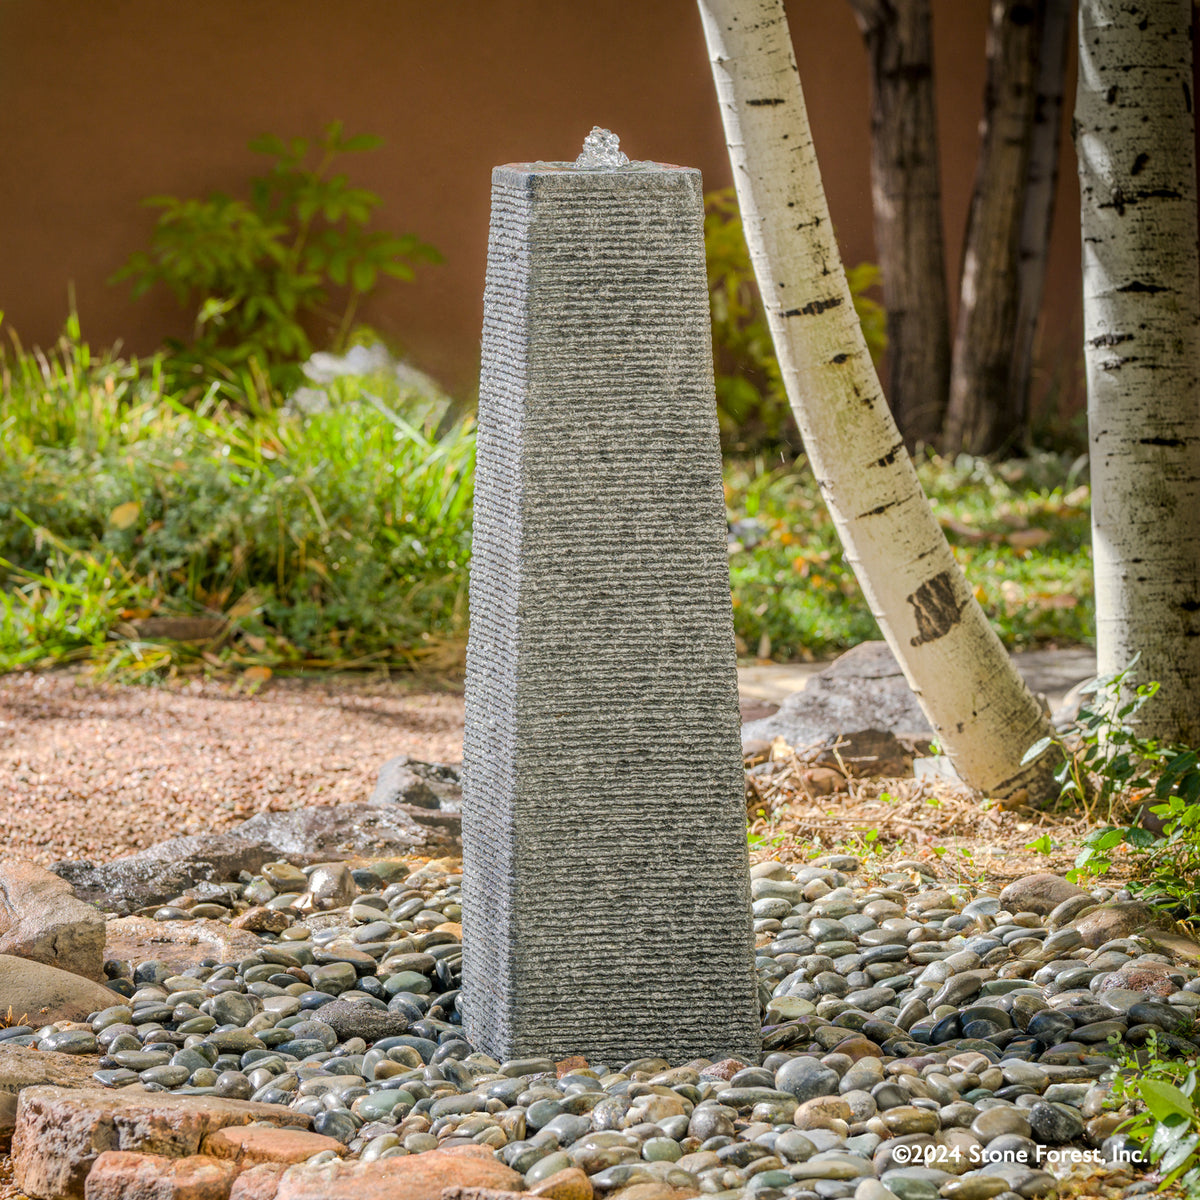 The Obelisk Fountain is a stone pillar, typically having a square cross-section and a pyramidal top. Set it up as a monument or landmark. Carved from Black & White Granite. image 2 of 2